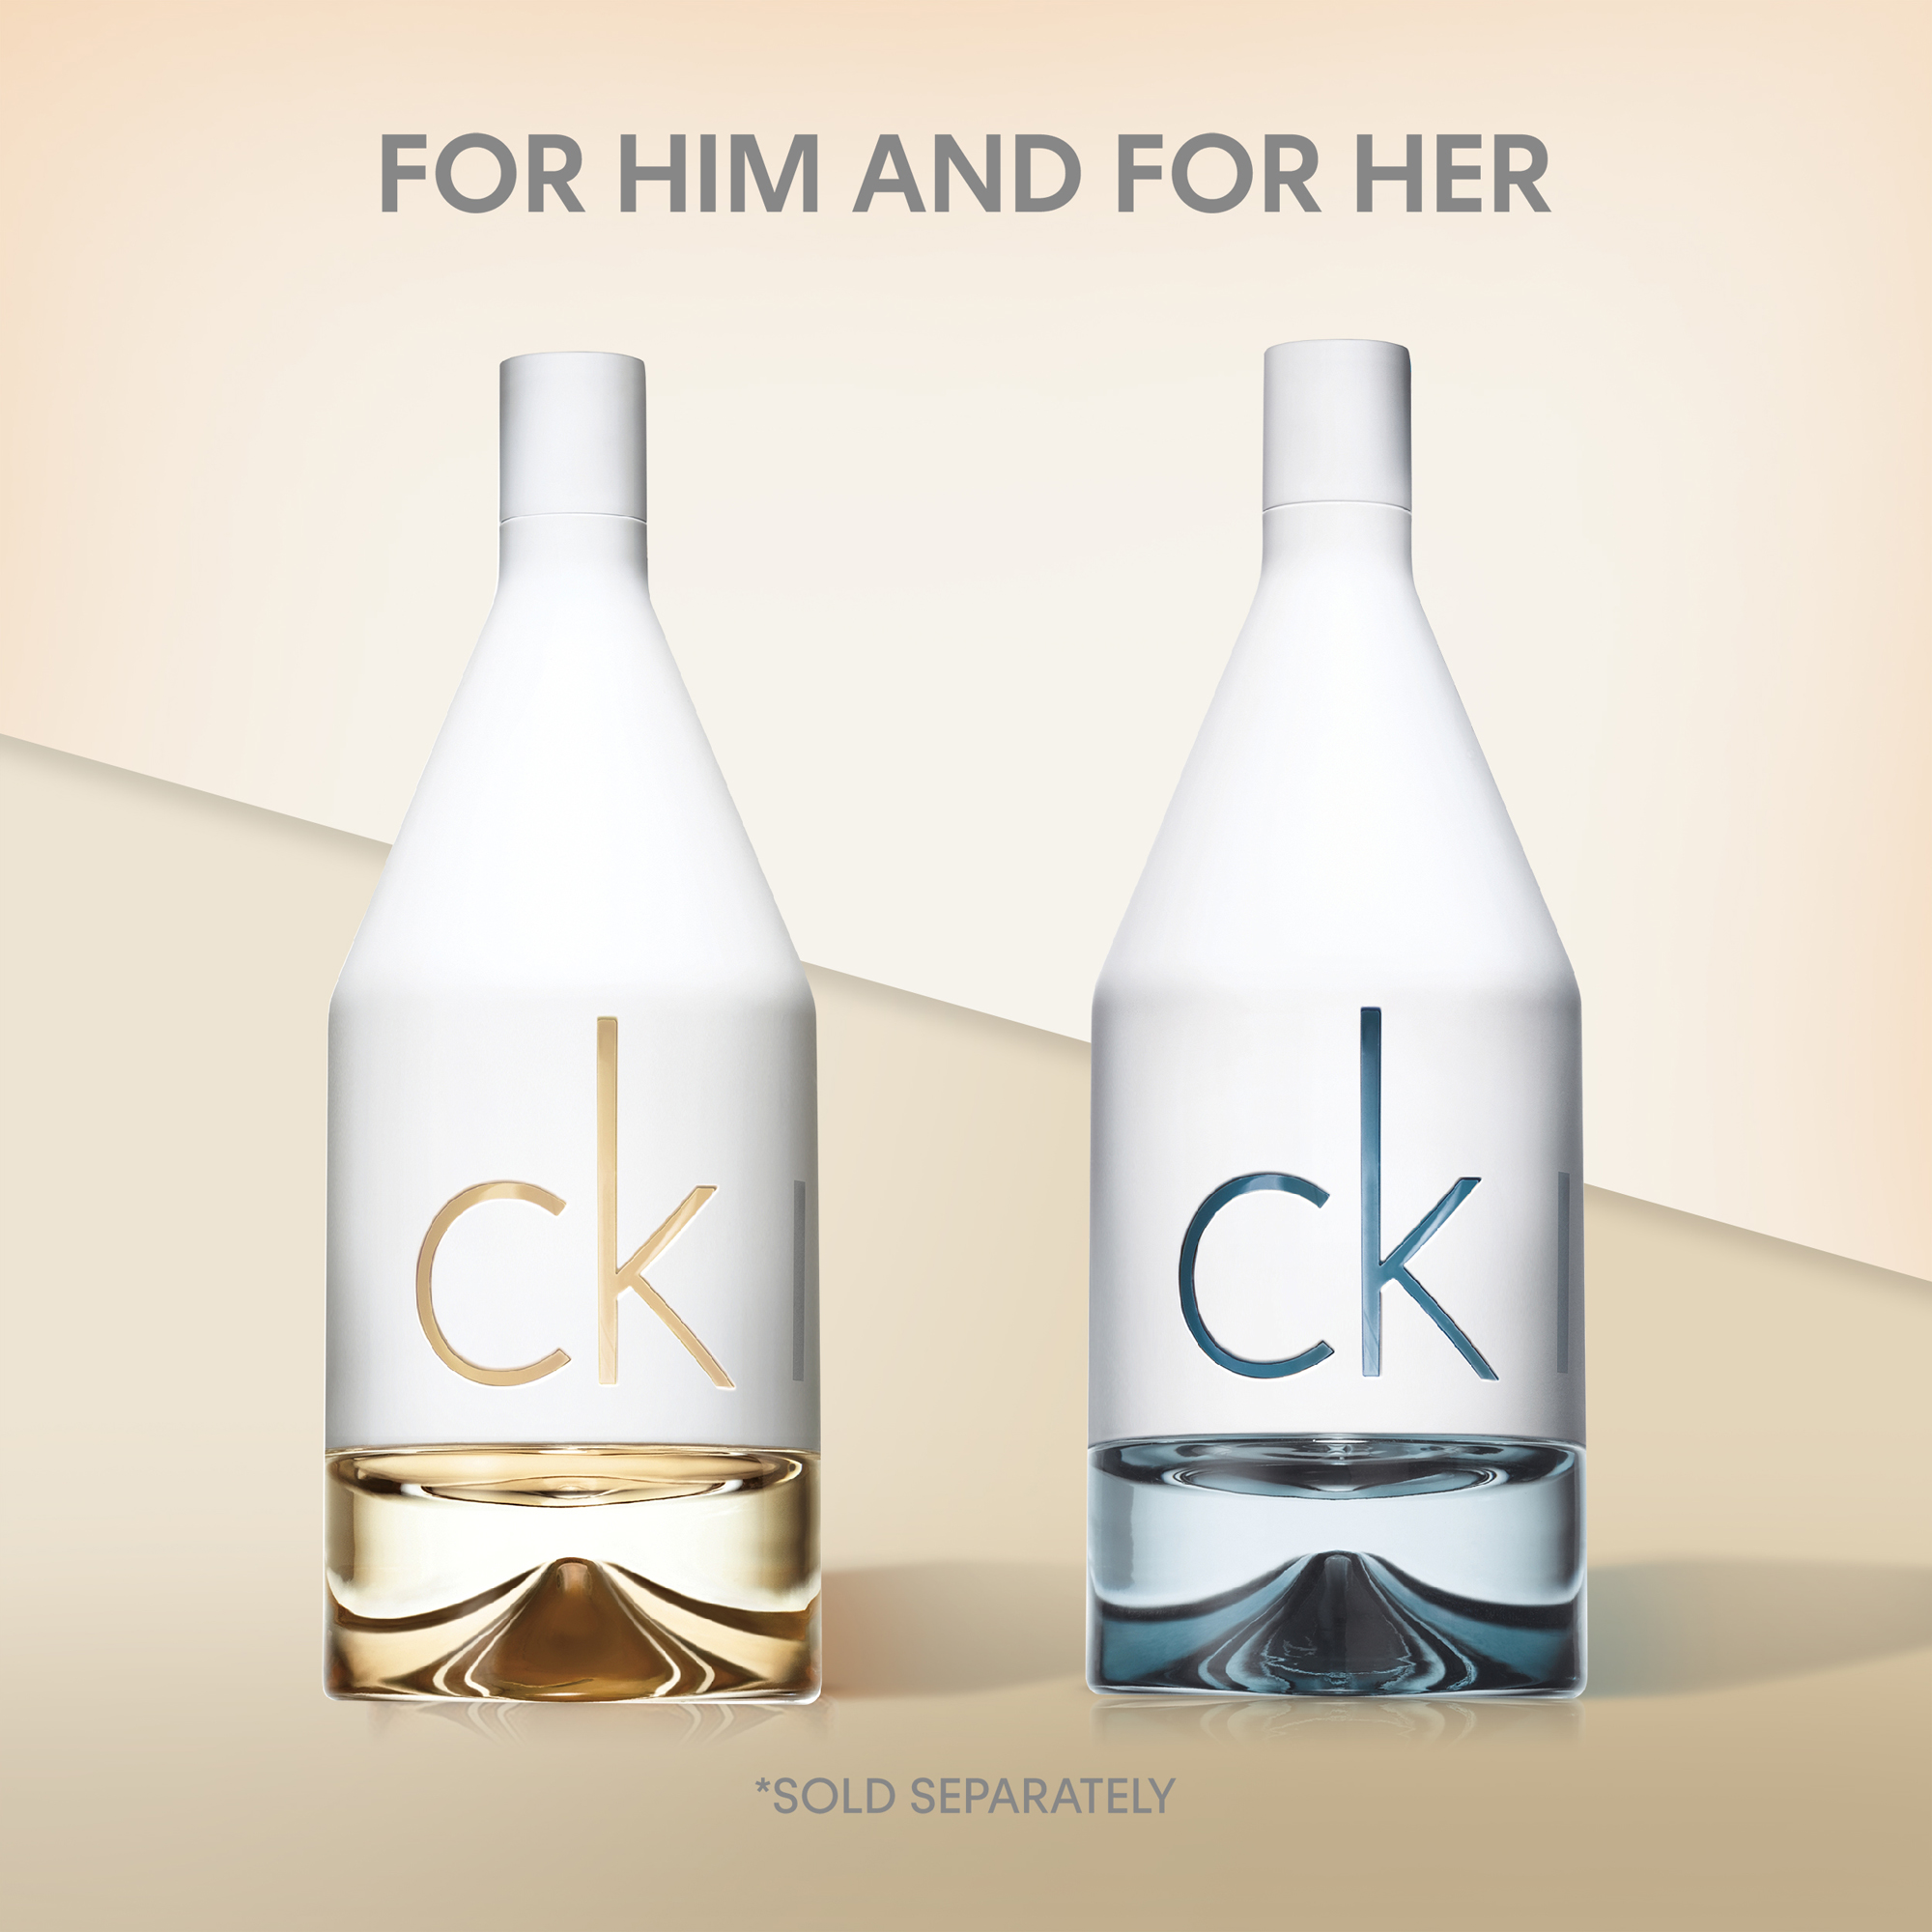 For him and for her *Sold separately